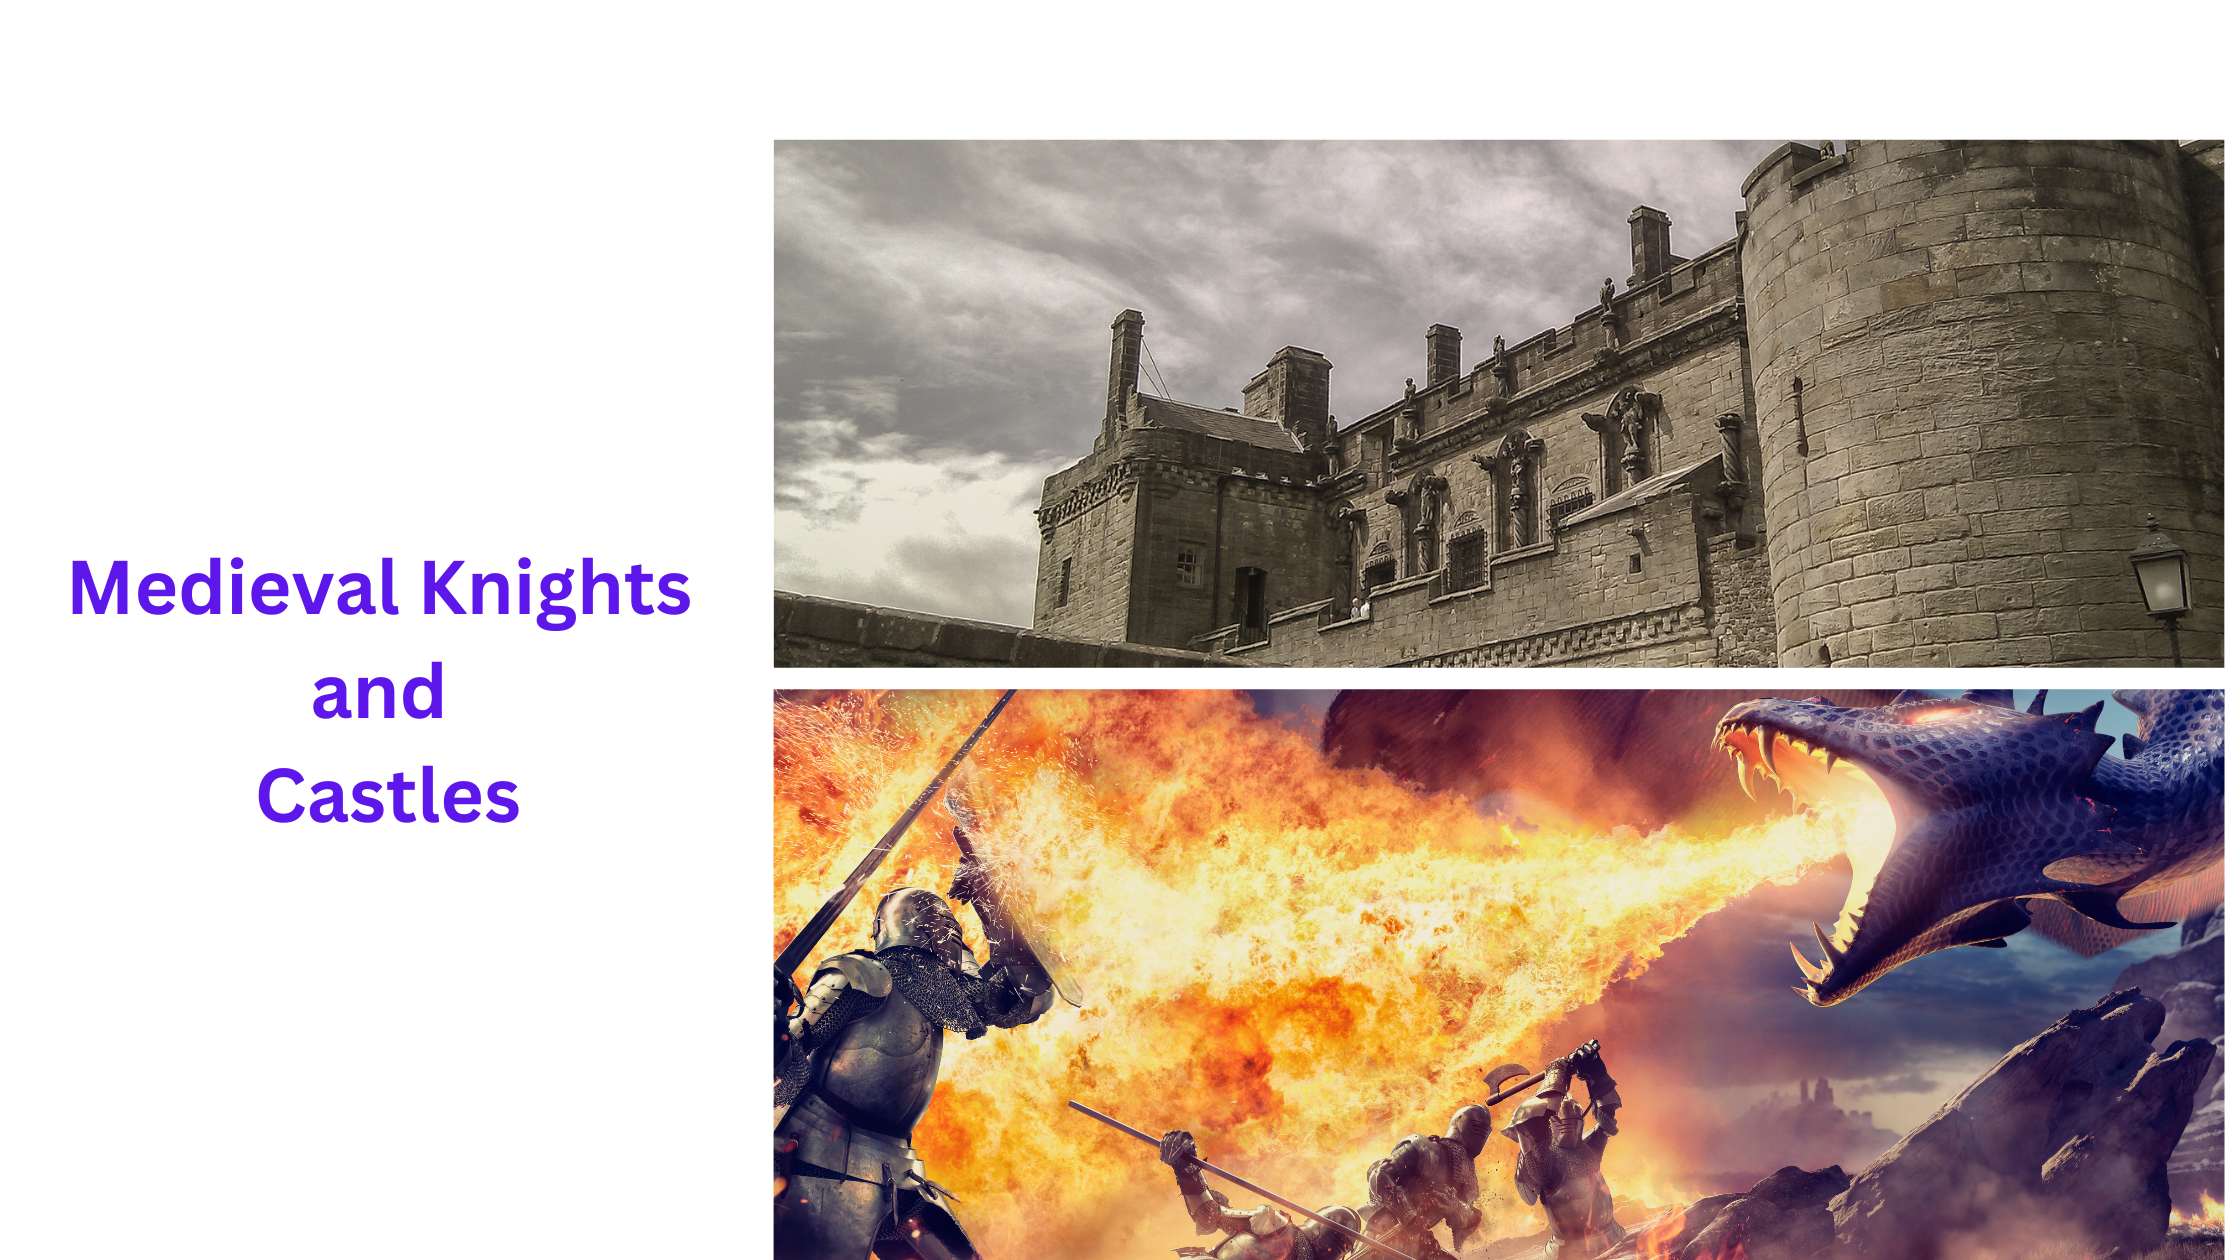 Medieval Knights and Castles